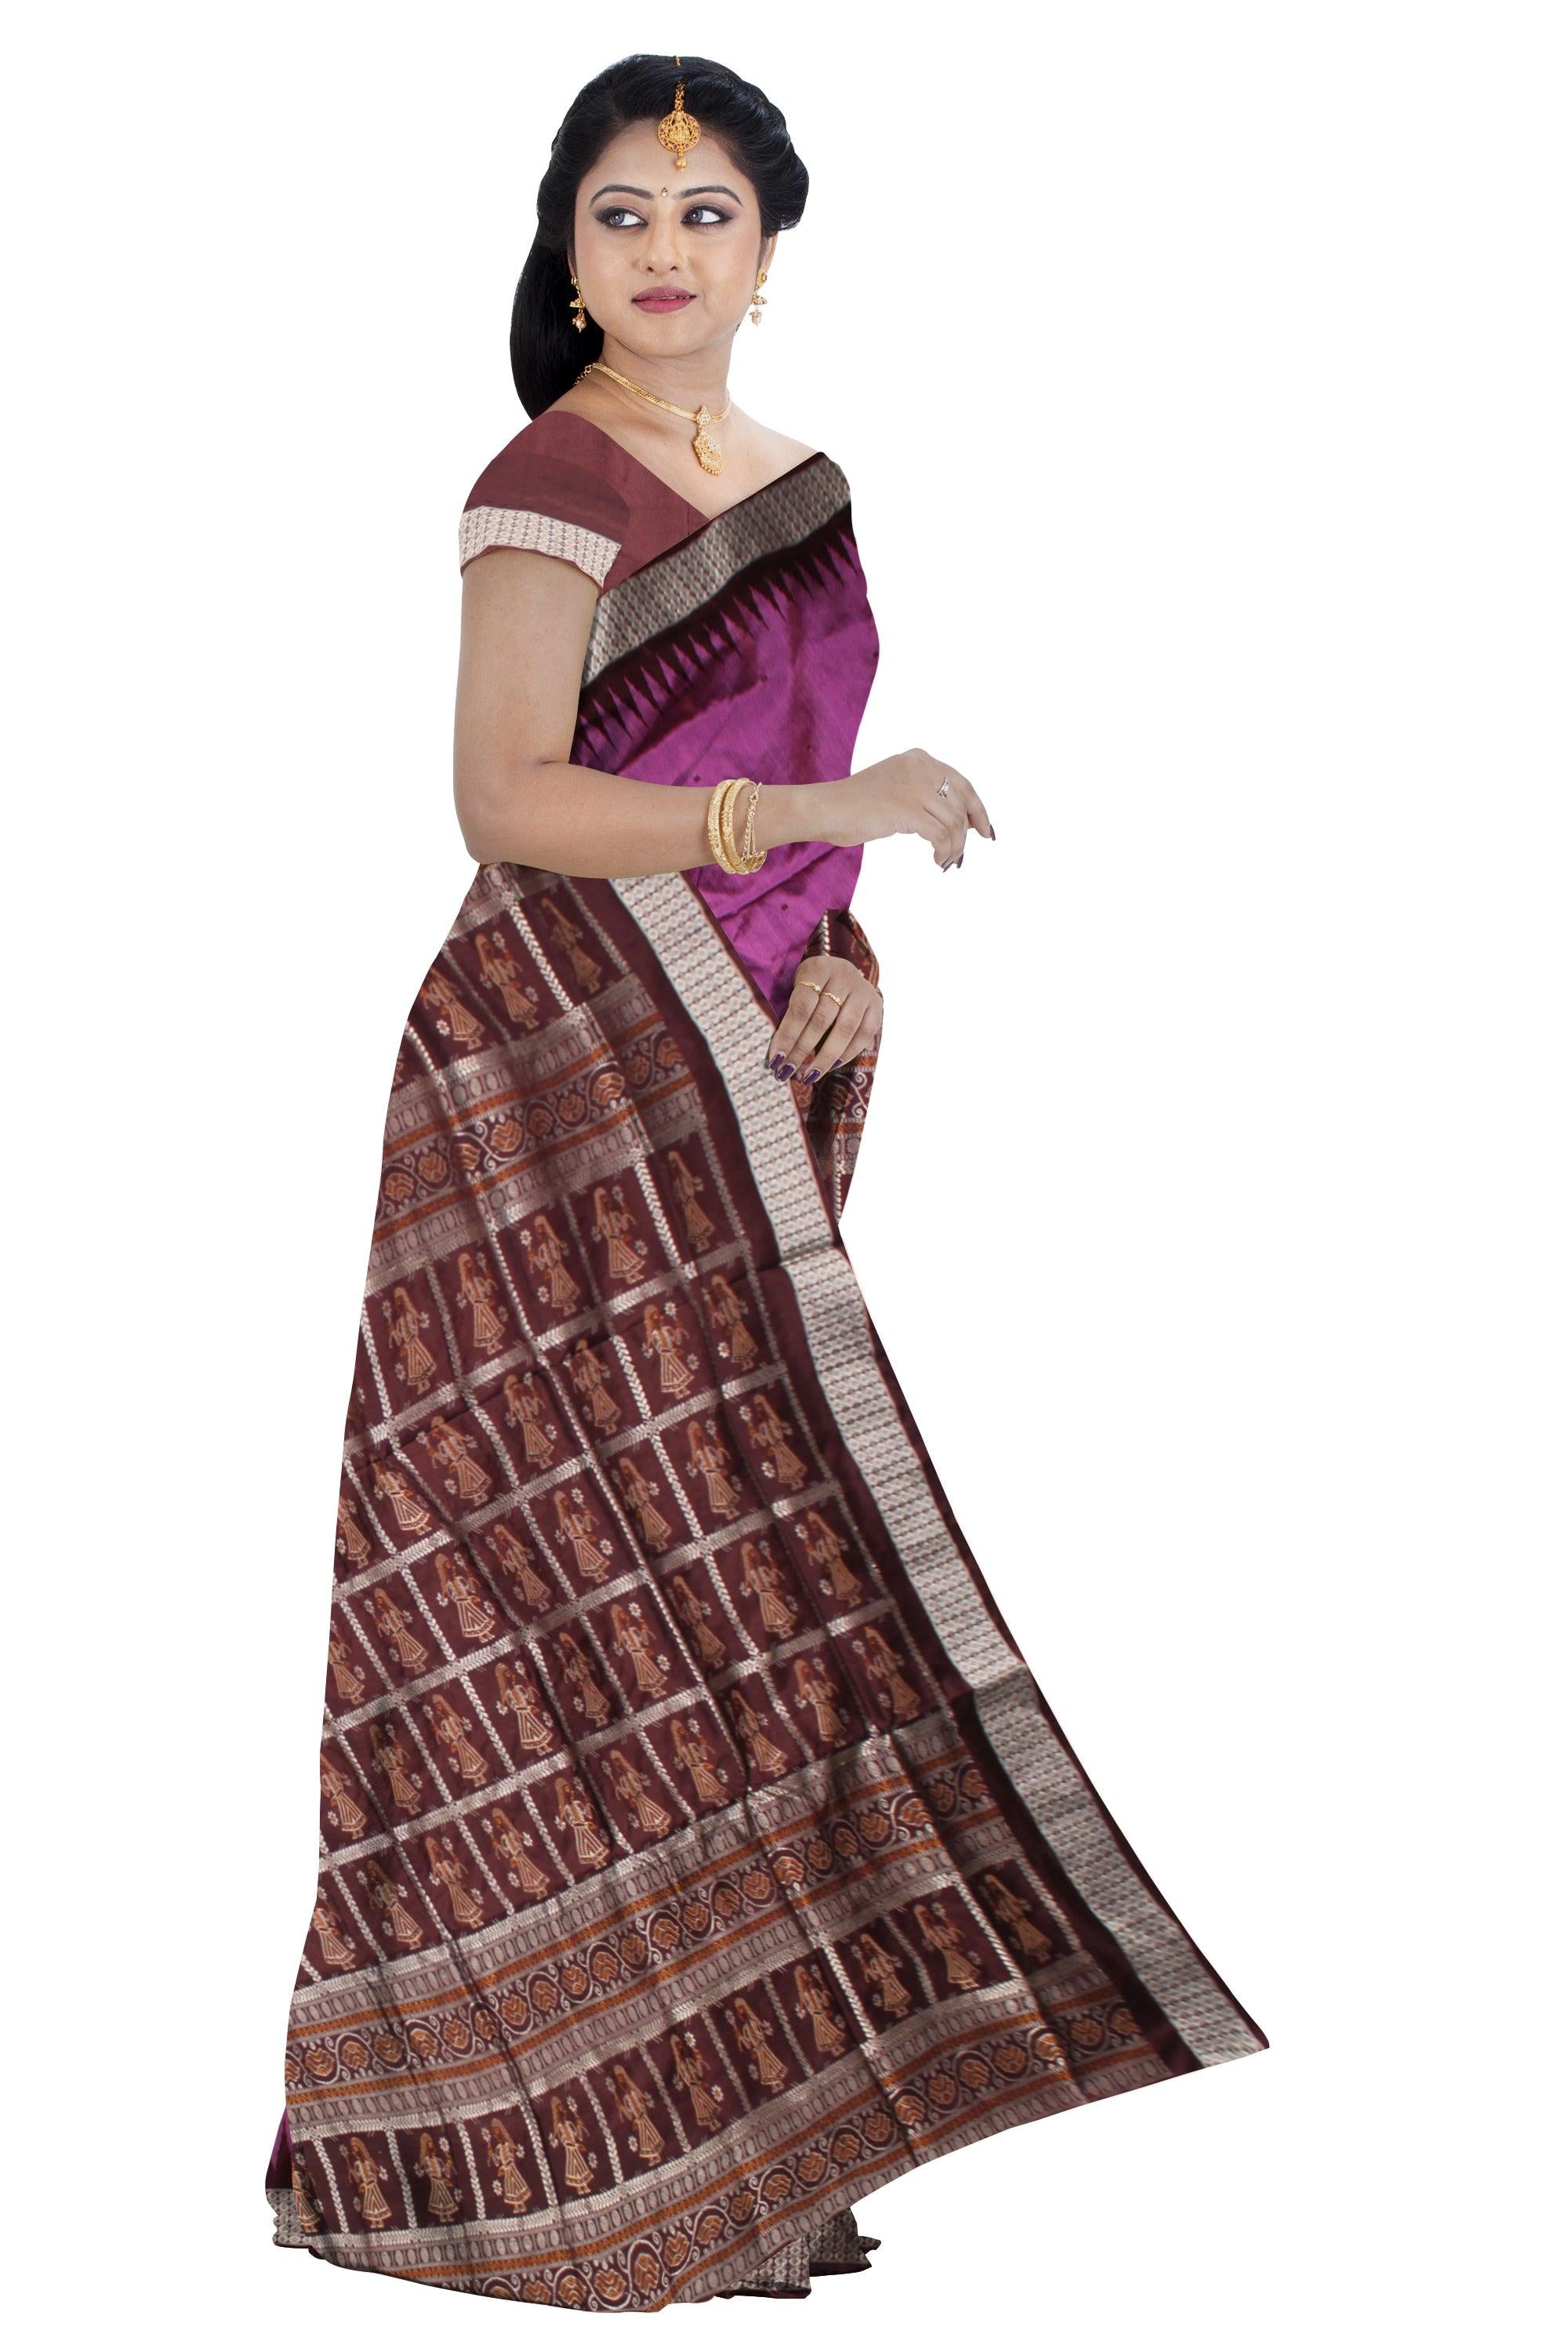 LATEST DOLL PRINT PALLU BOOTY PATTERN PATA SAREE IS HOTPINK AND MAROON COLOR BASE, WITH BLOUSE PIECE. - Koshali Arts & Crafts Enterprise